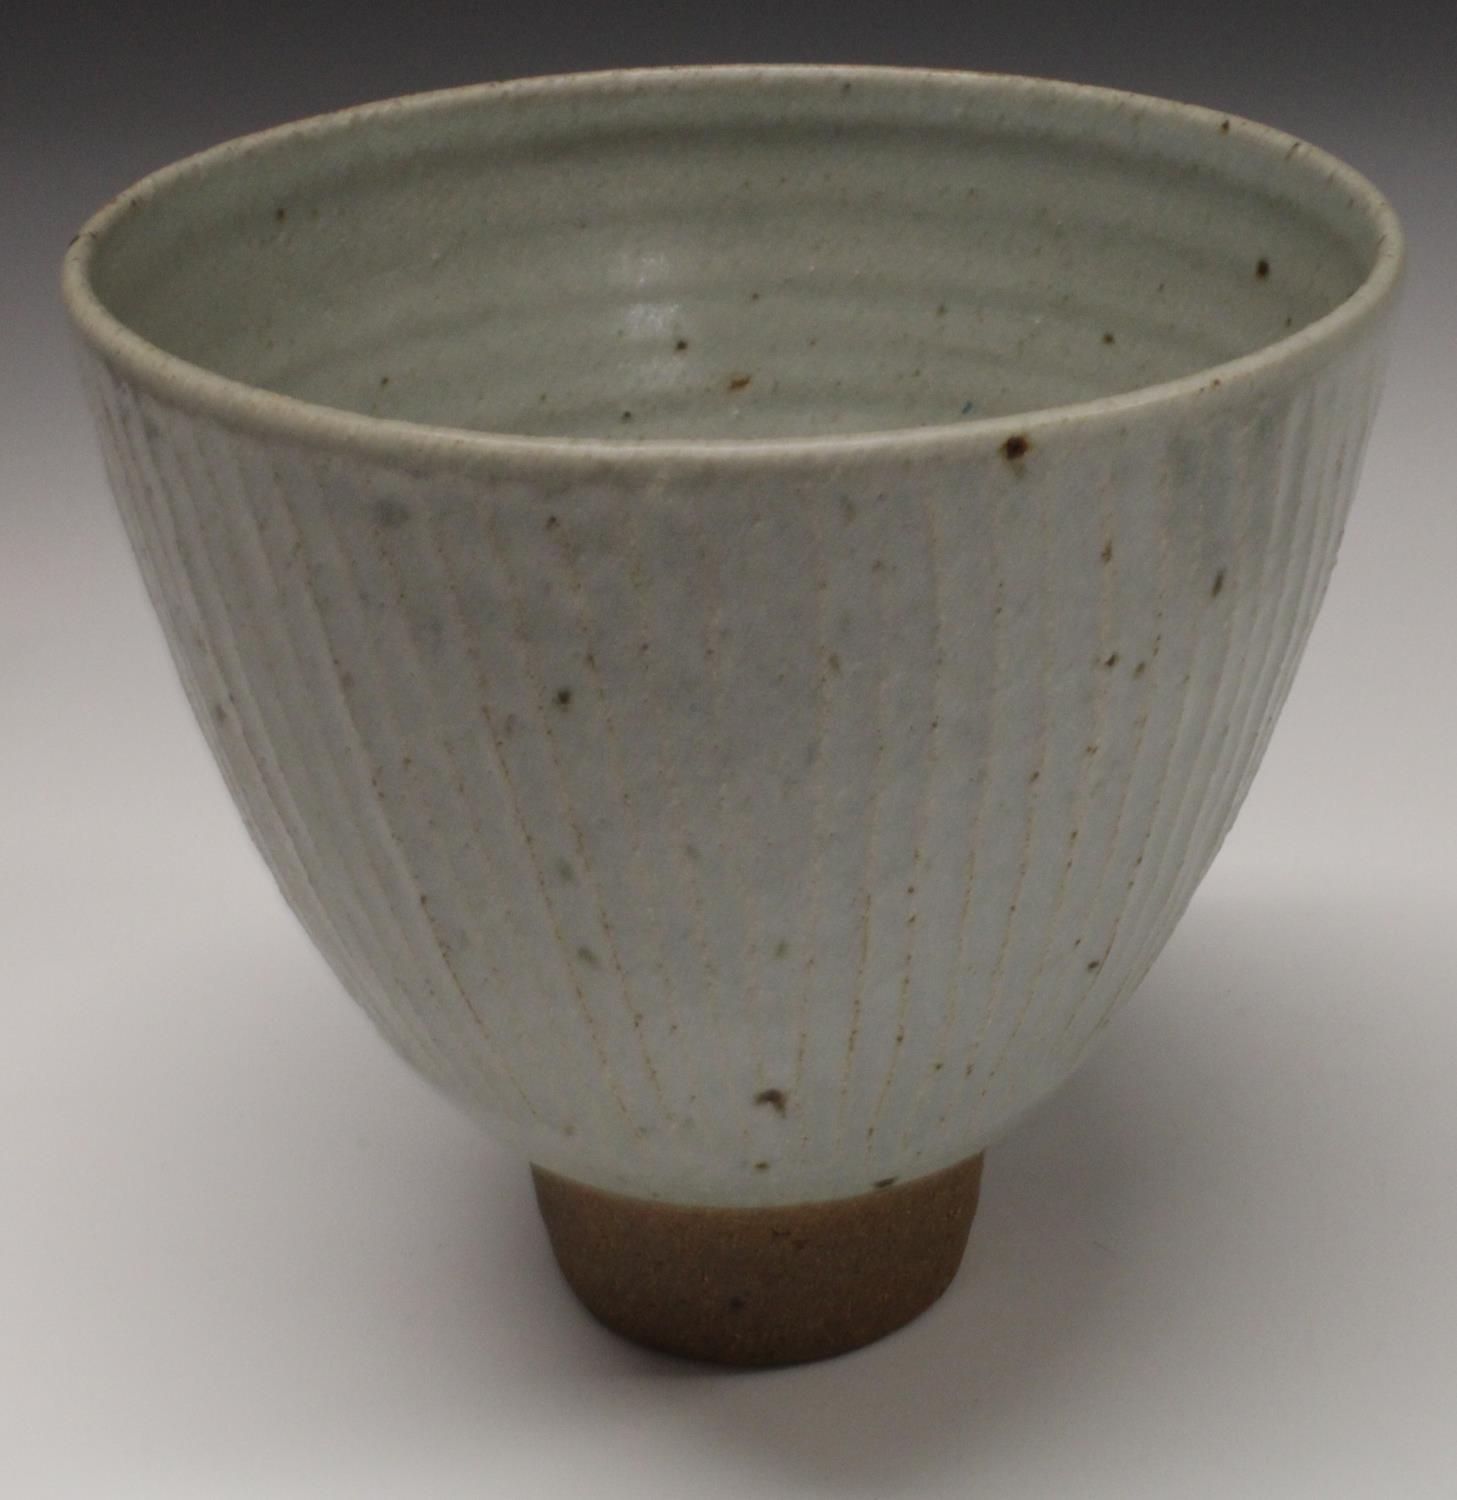 A Joanna Constantinidis style conical bowl, mottled grey glaze, 16. - Image 3 of 3